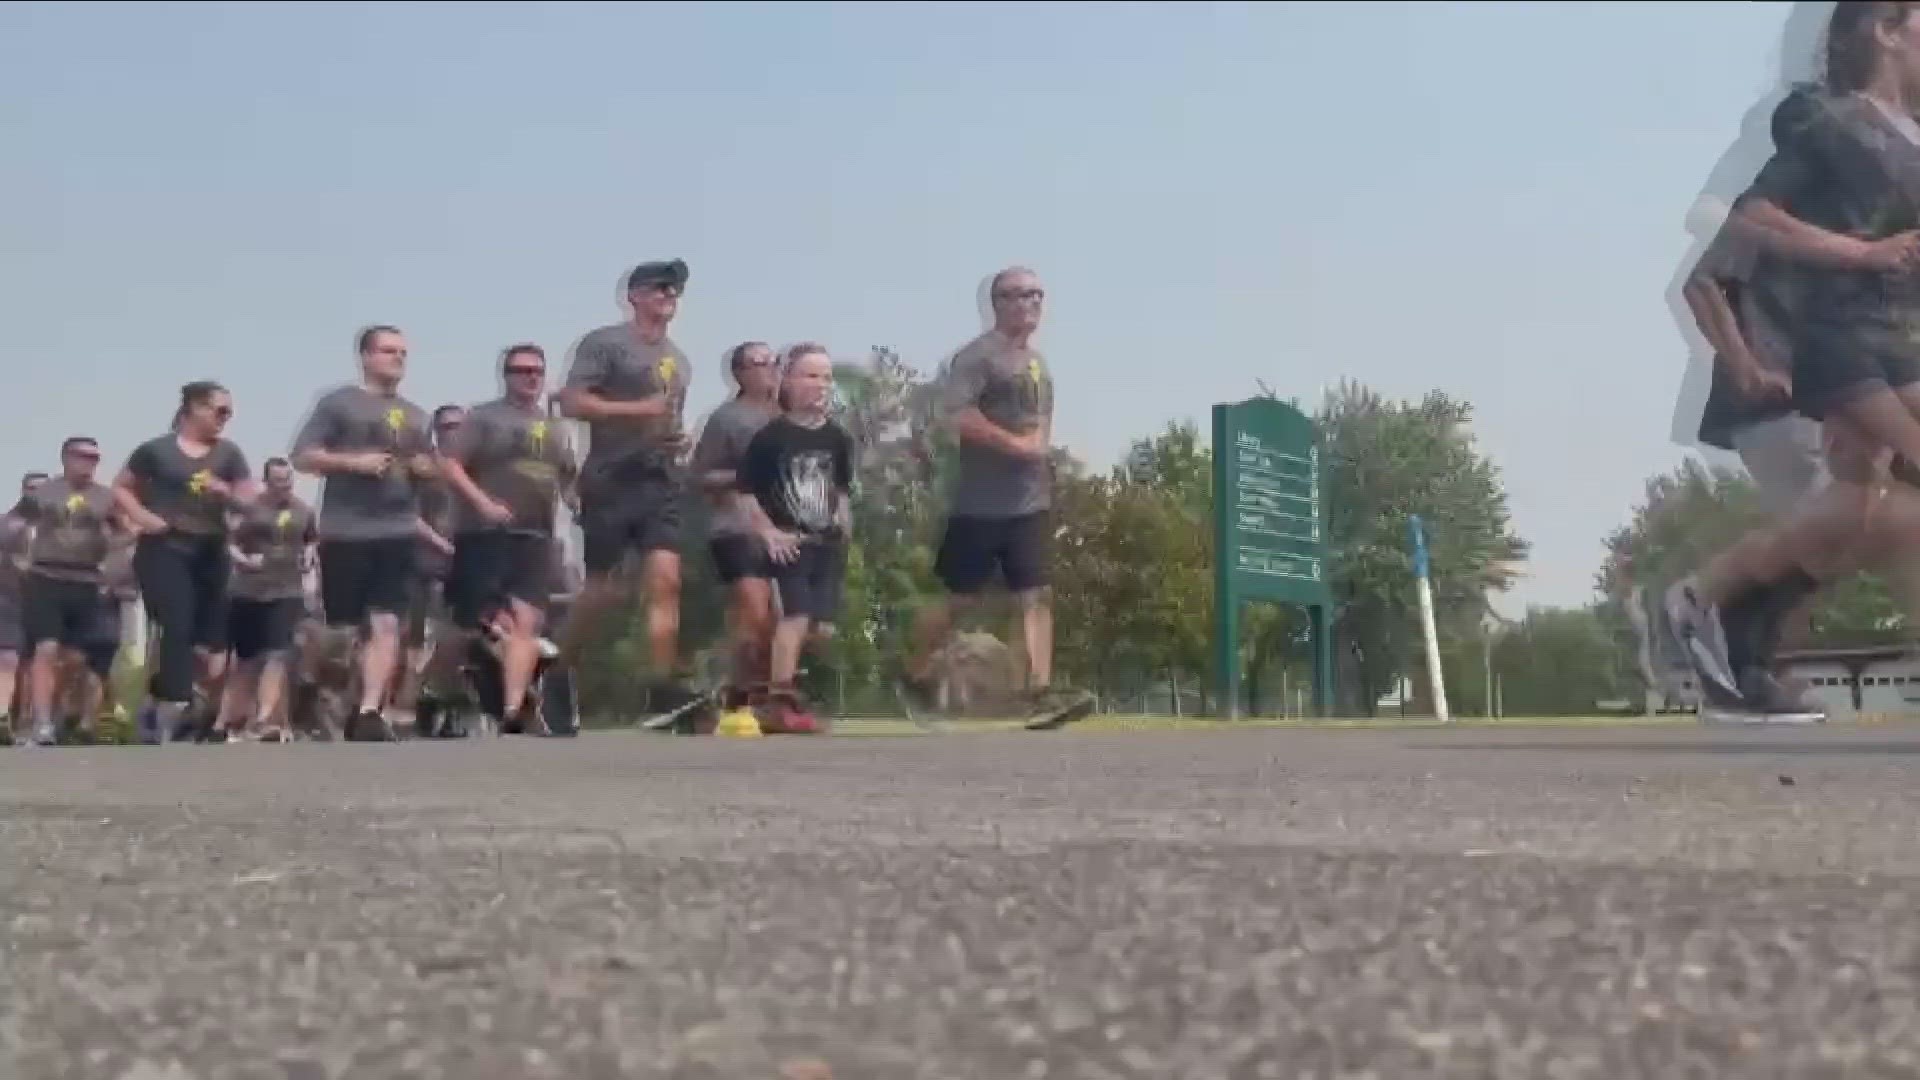 The nearly five mile leg of the Law Enforcement Torch Run went from the SP Clarence barracks to Main and Transit.